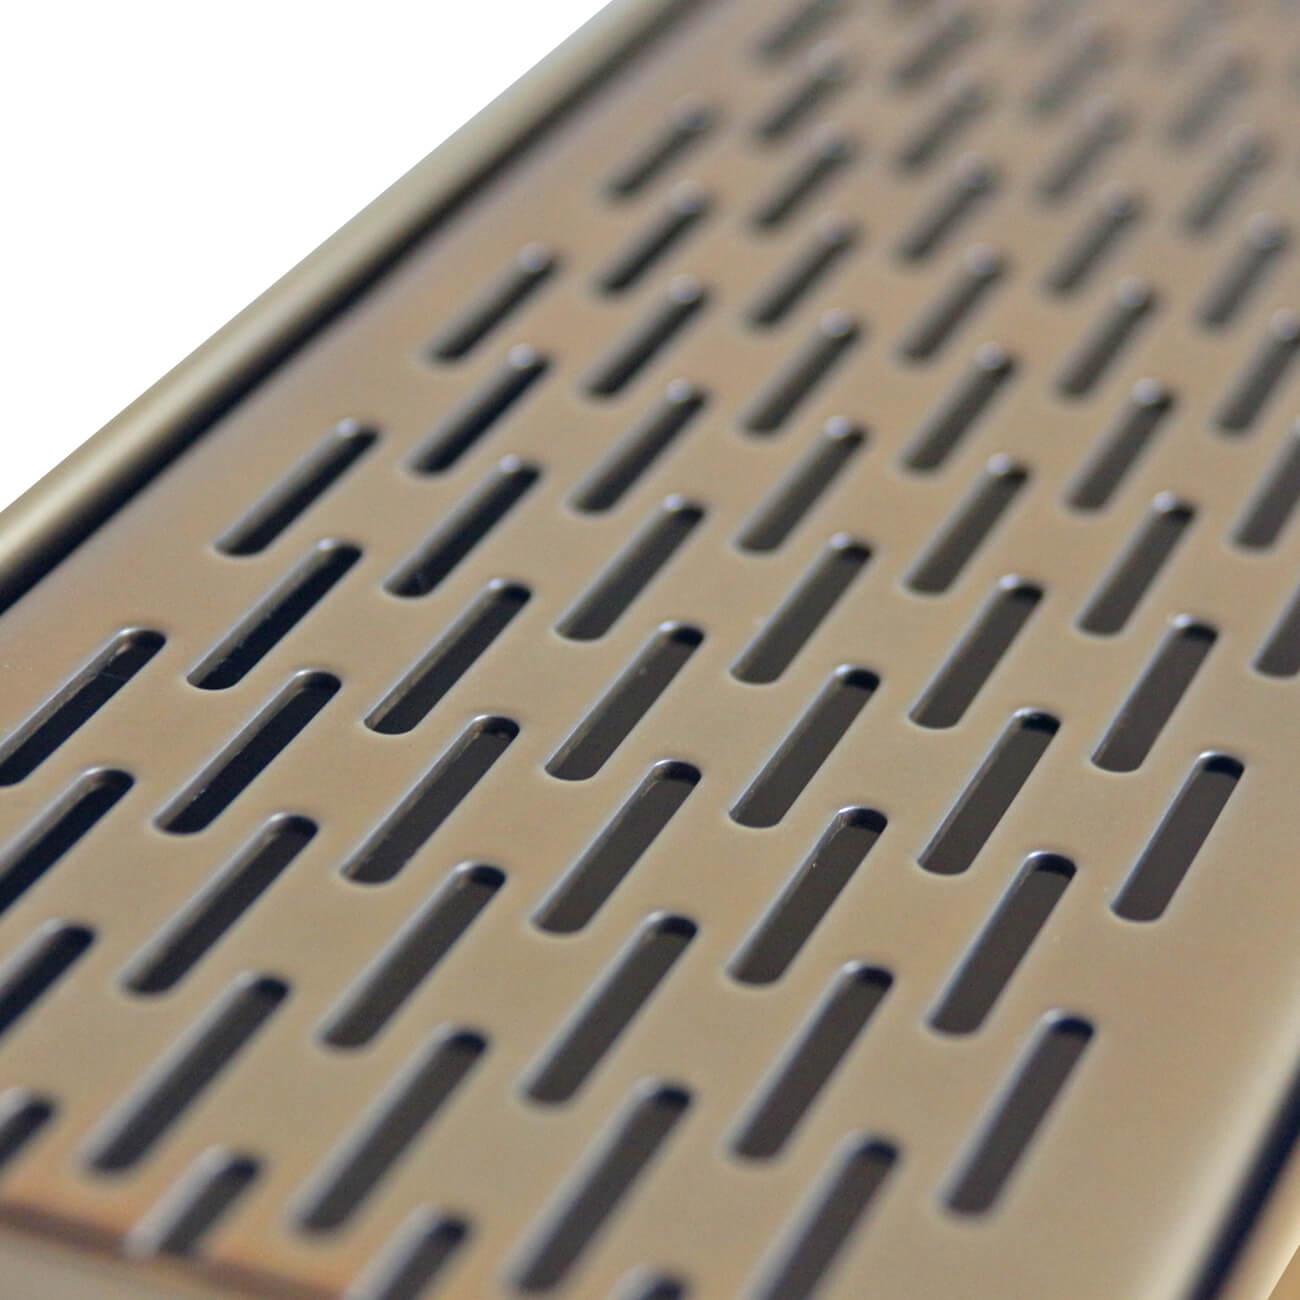 Standard Length Brick Pattern Grate and Channel Drain - Gold